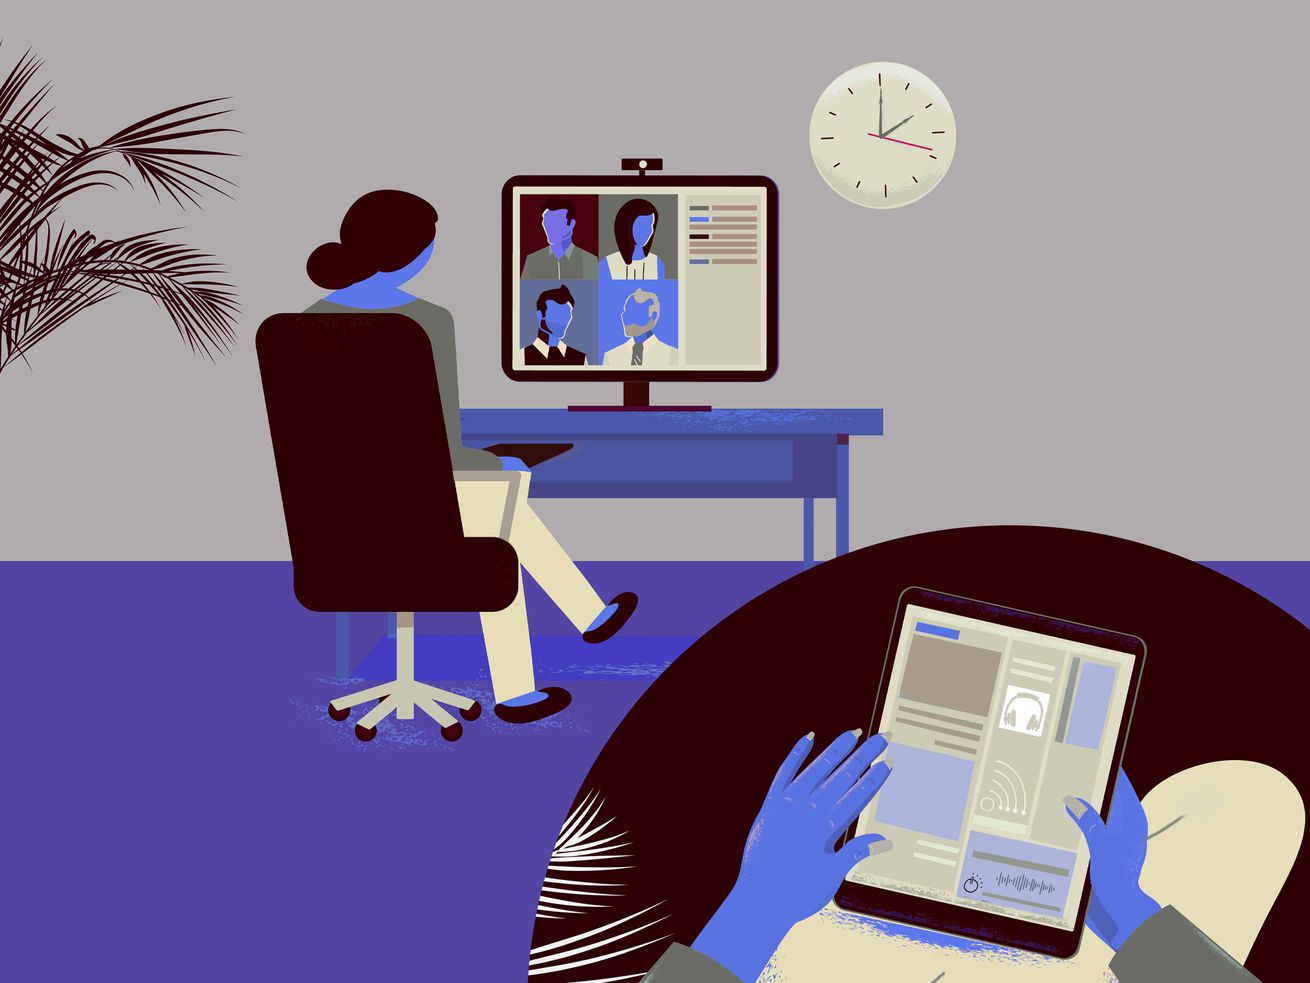 Cartoon illustration of a worker at a desk with a screen displaying a Zoom call. In the foreground is an inset showing that the person has a tablet in their lap out of sight of the work meeting.